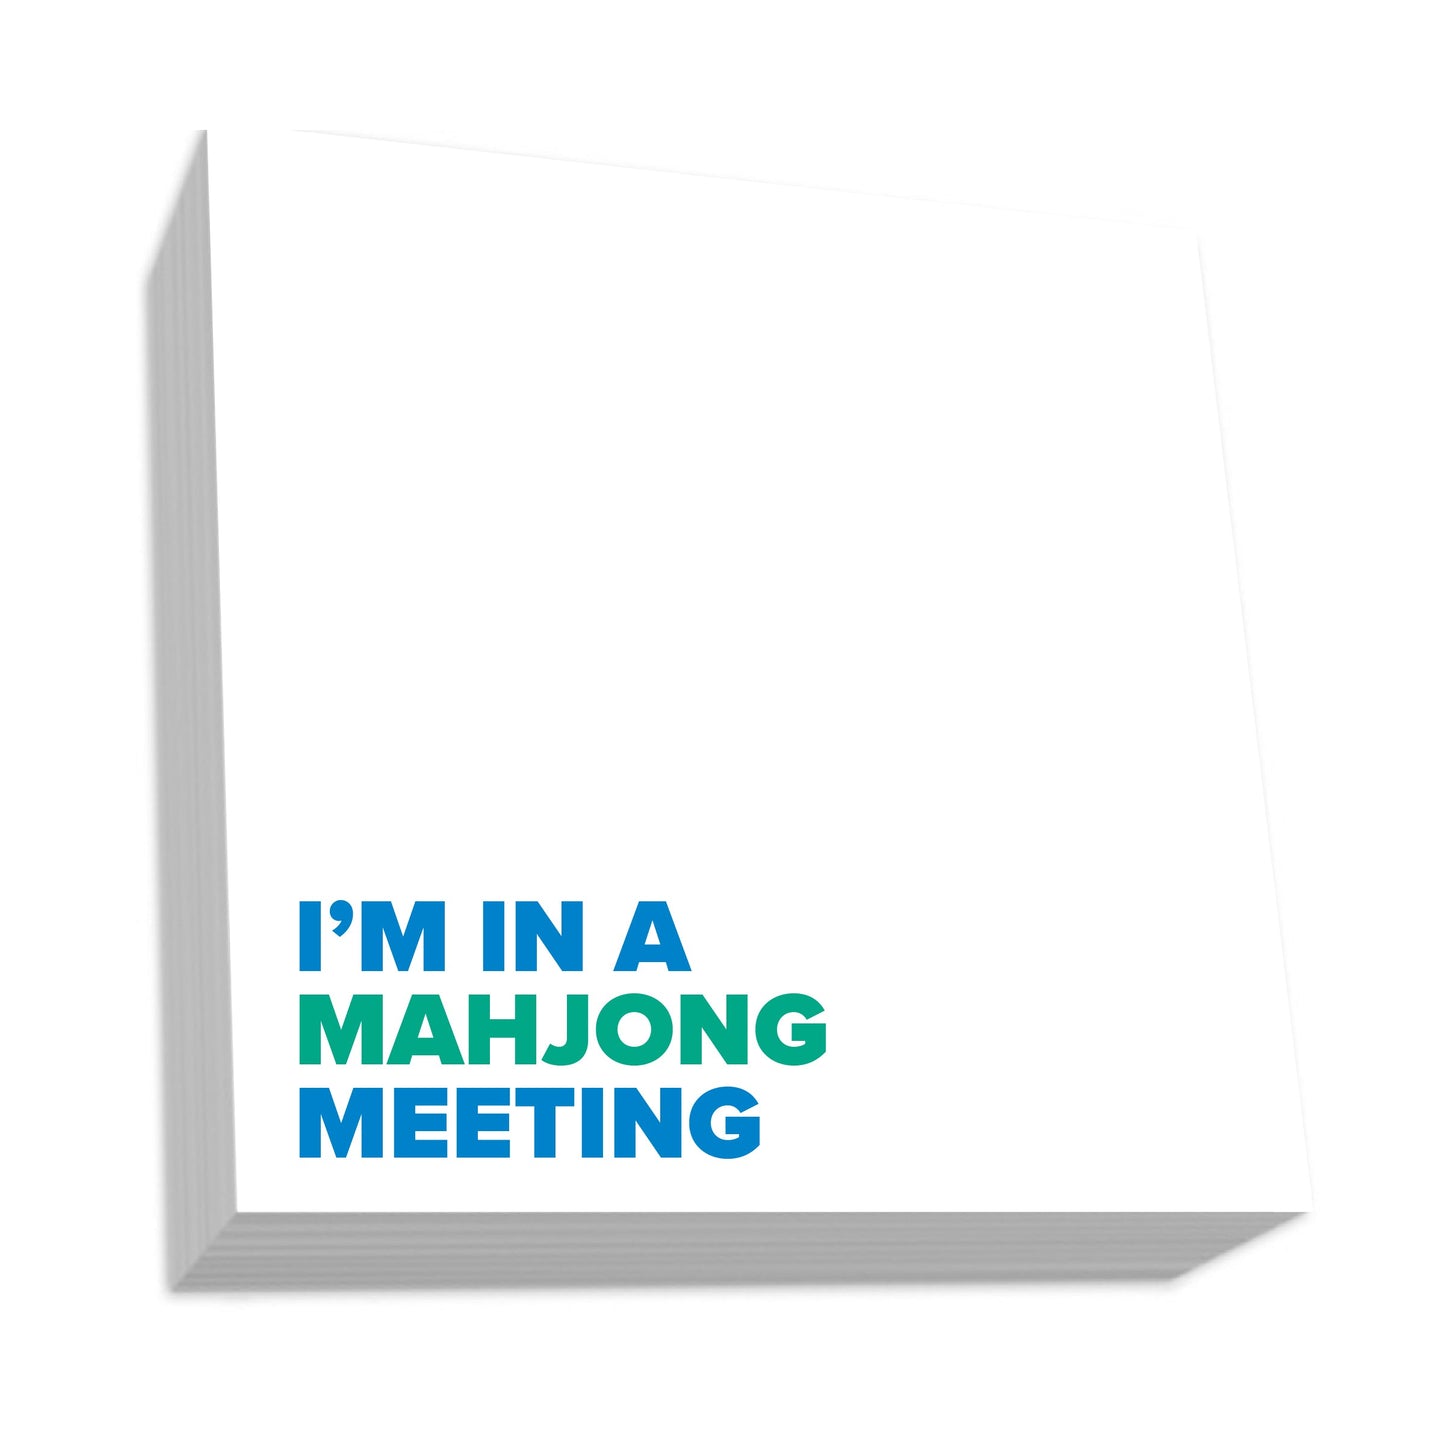 "I'M IN A MAHJONG MEETING NOTEPAD